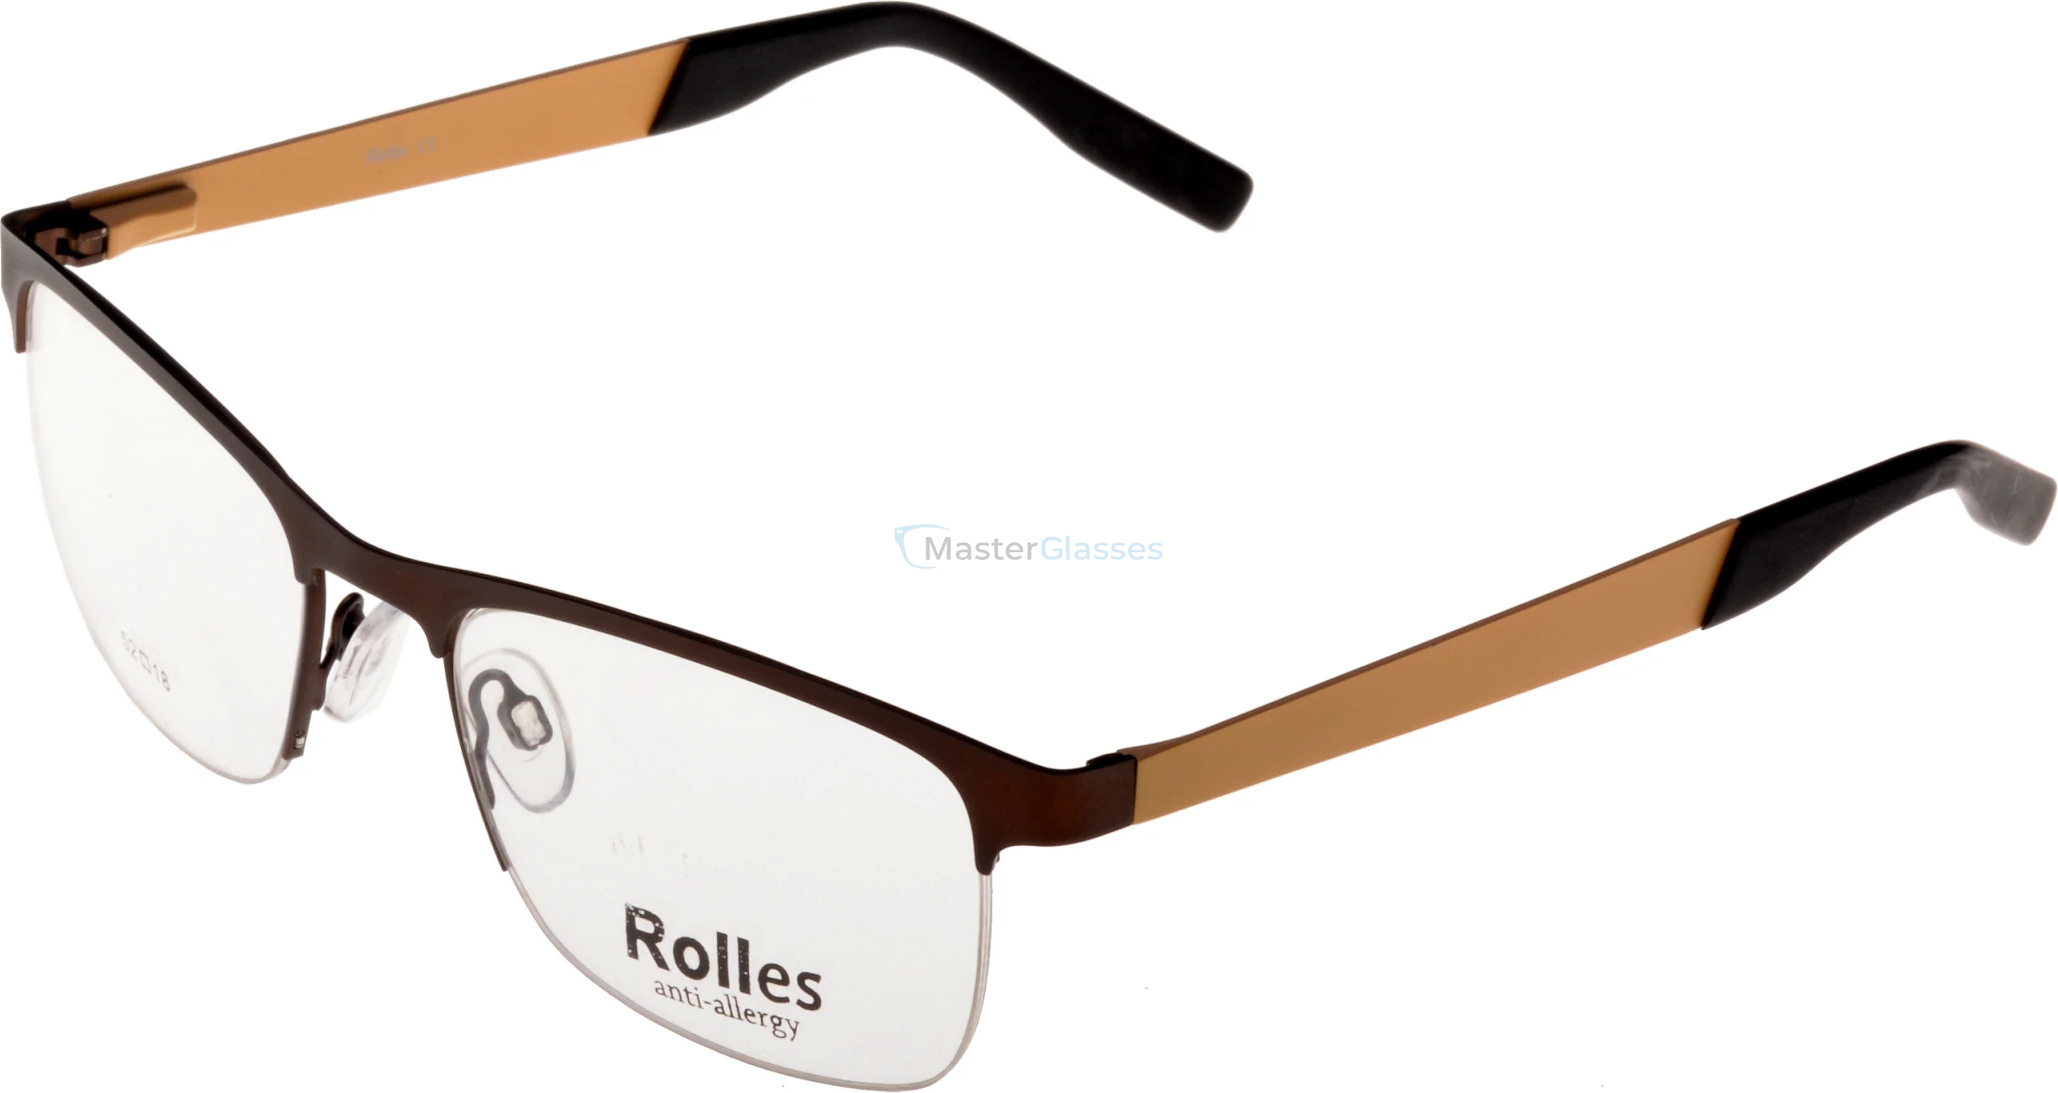  Rolles 462 02